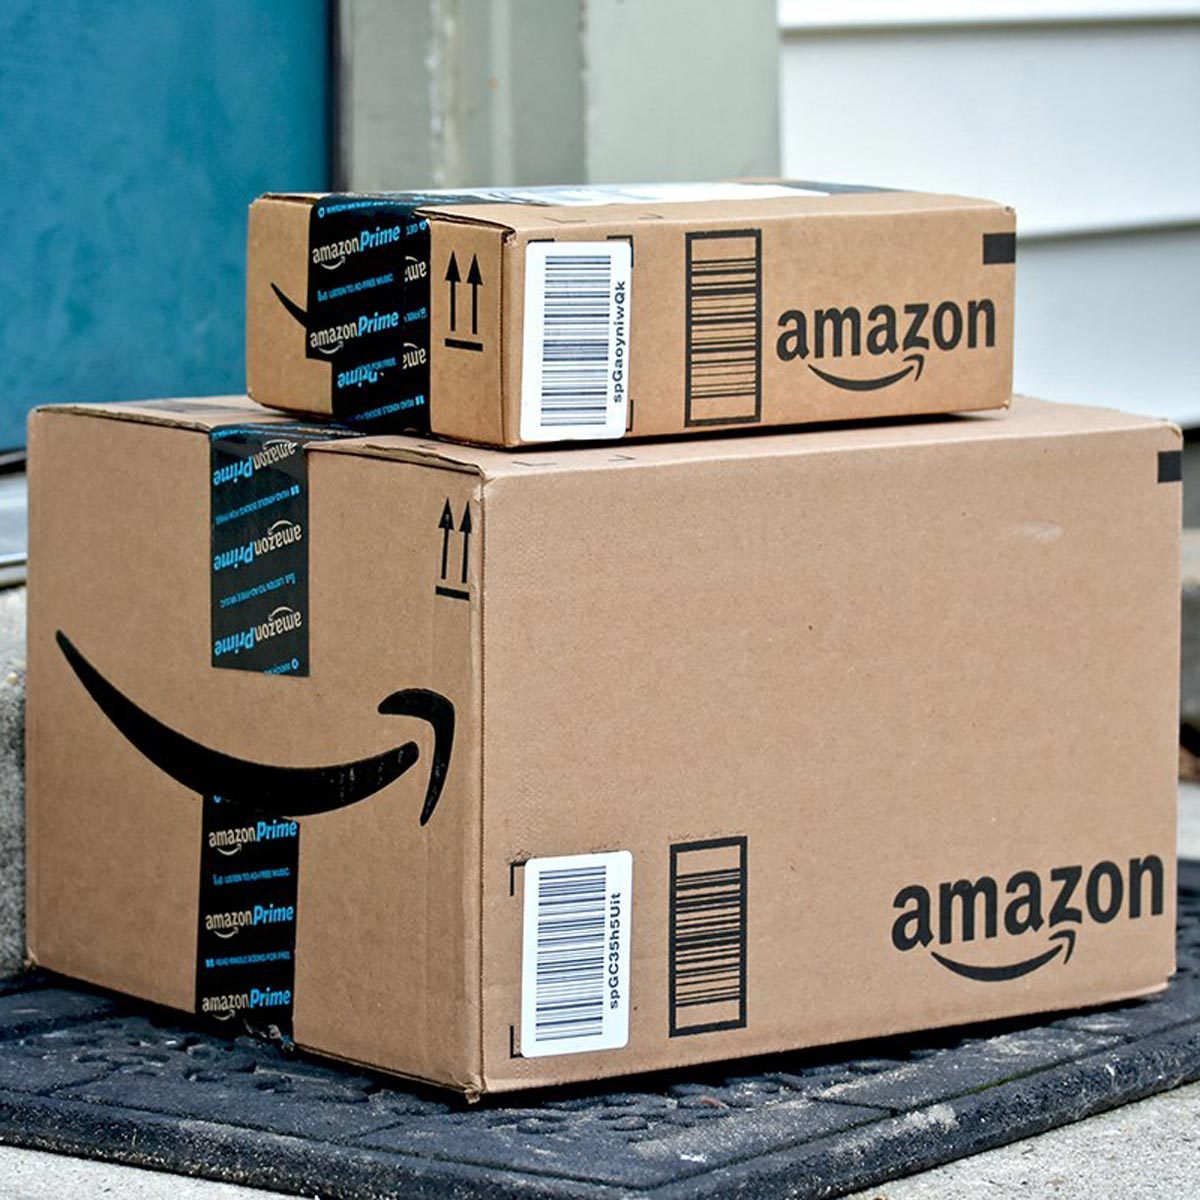 When is Amazon Prime Day This Year?